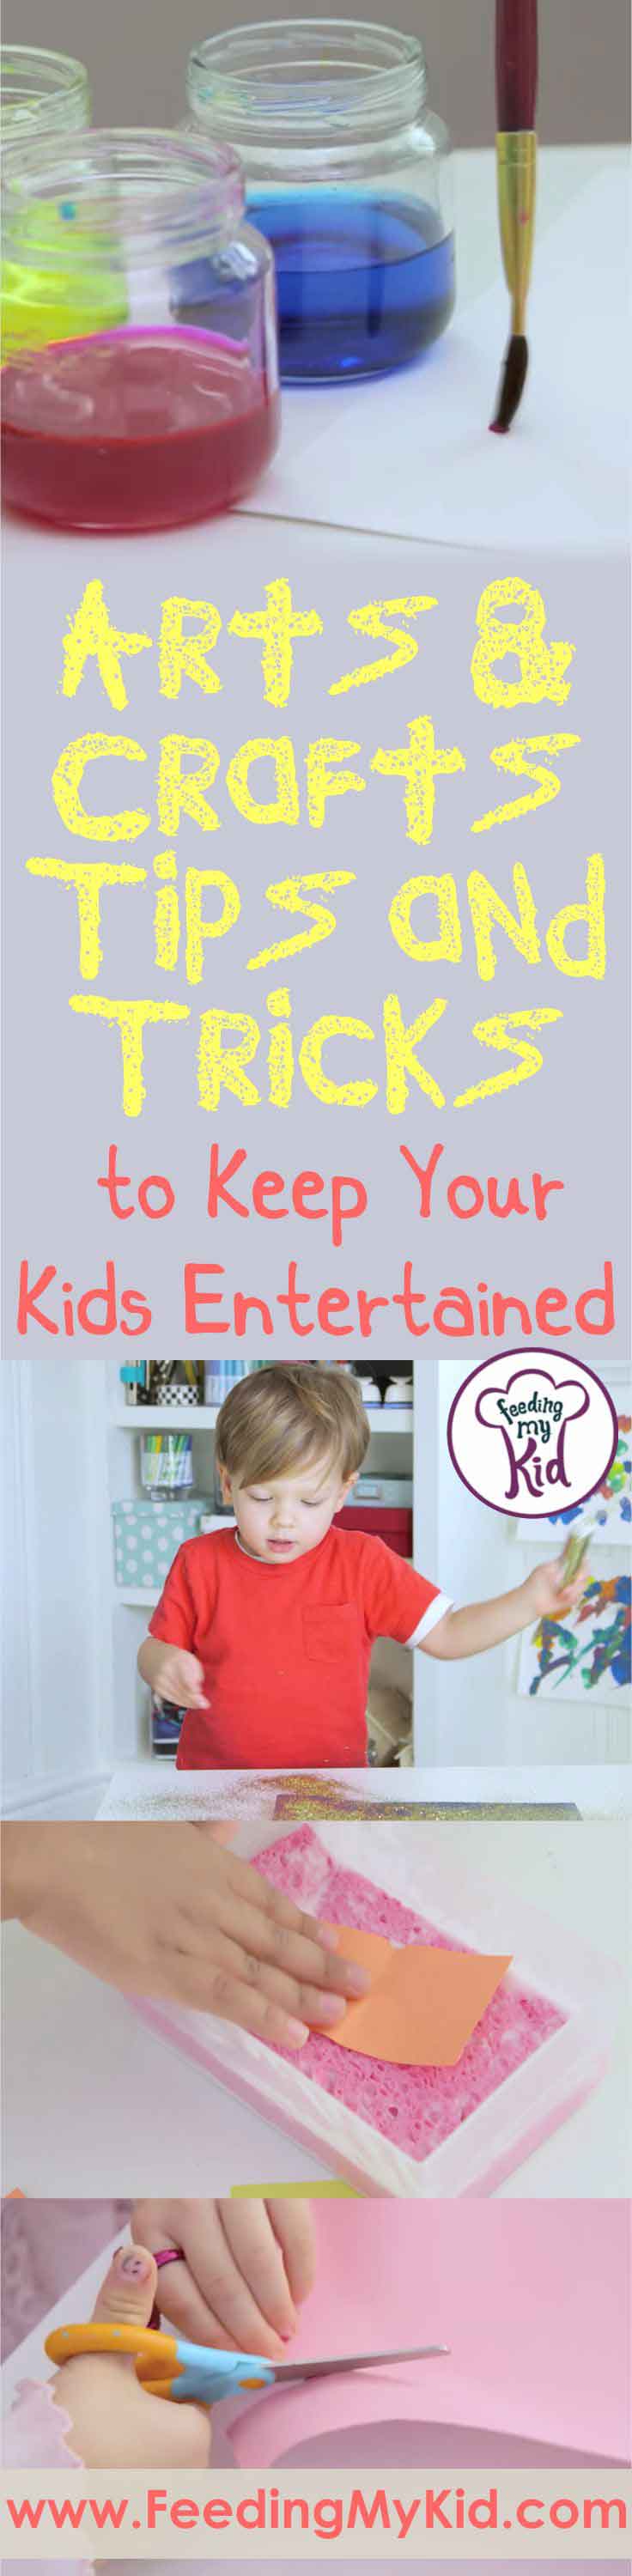 These arts and crafts hacks keep your little one's hands cleaner and your home tidier! You'll be able to make sure everything is in tip-top shape.